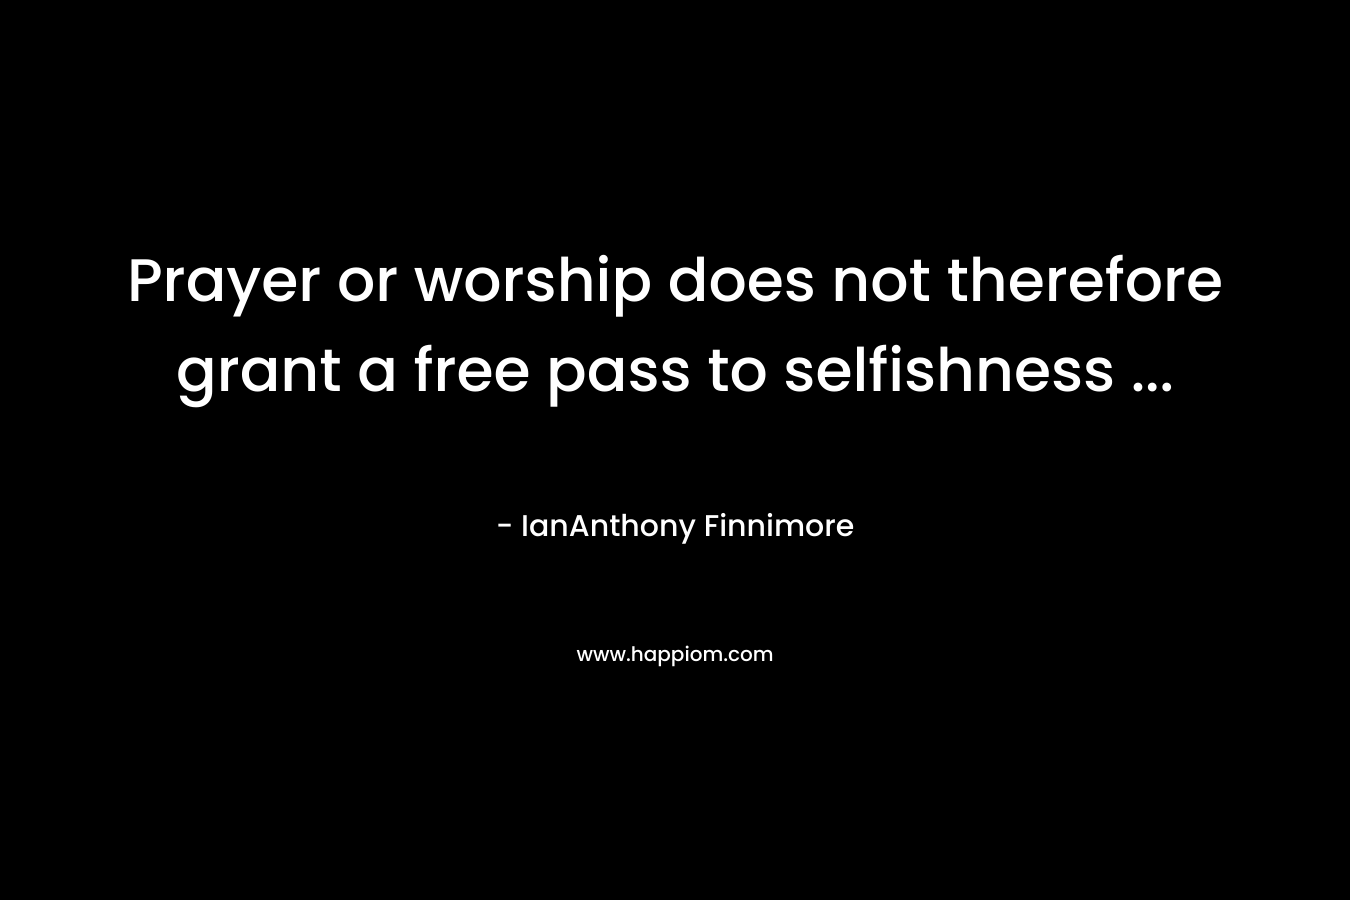 Prayer or worship does not therefore grant a free pass to selfishness ...